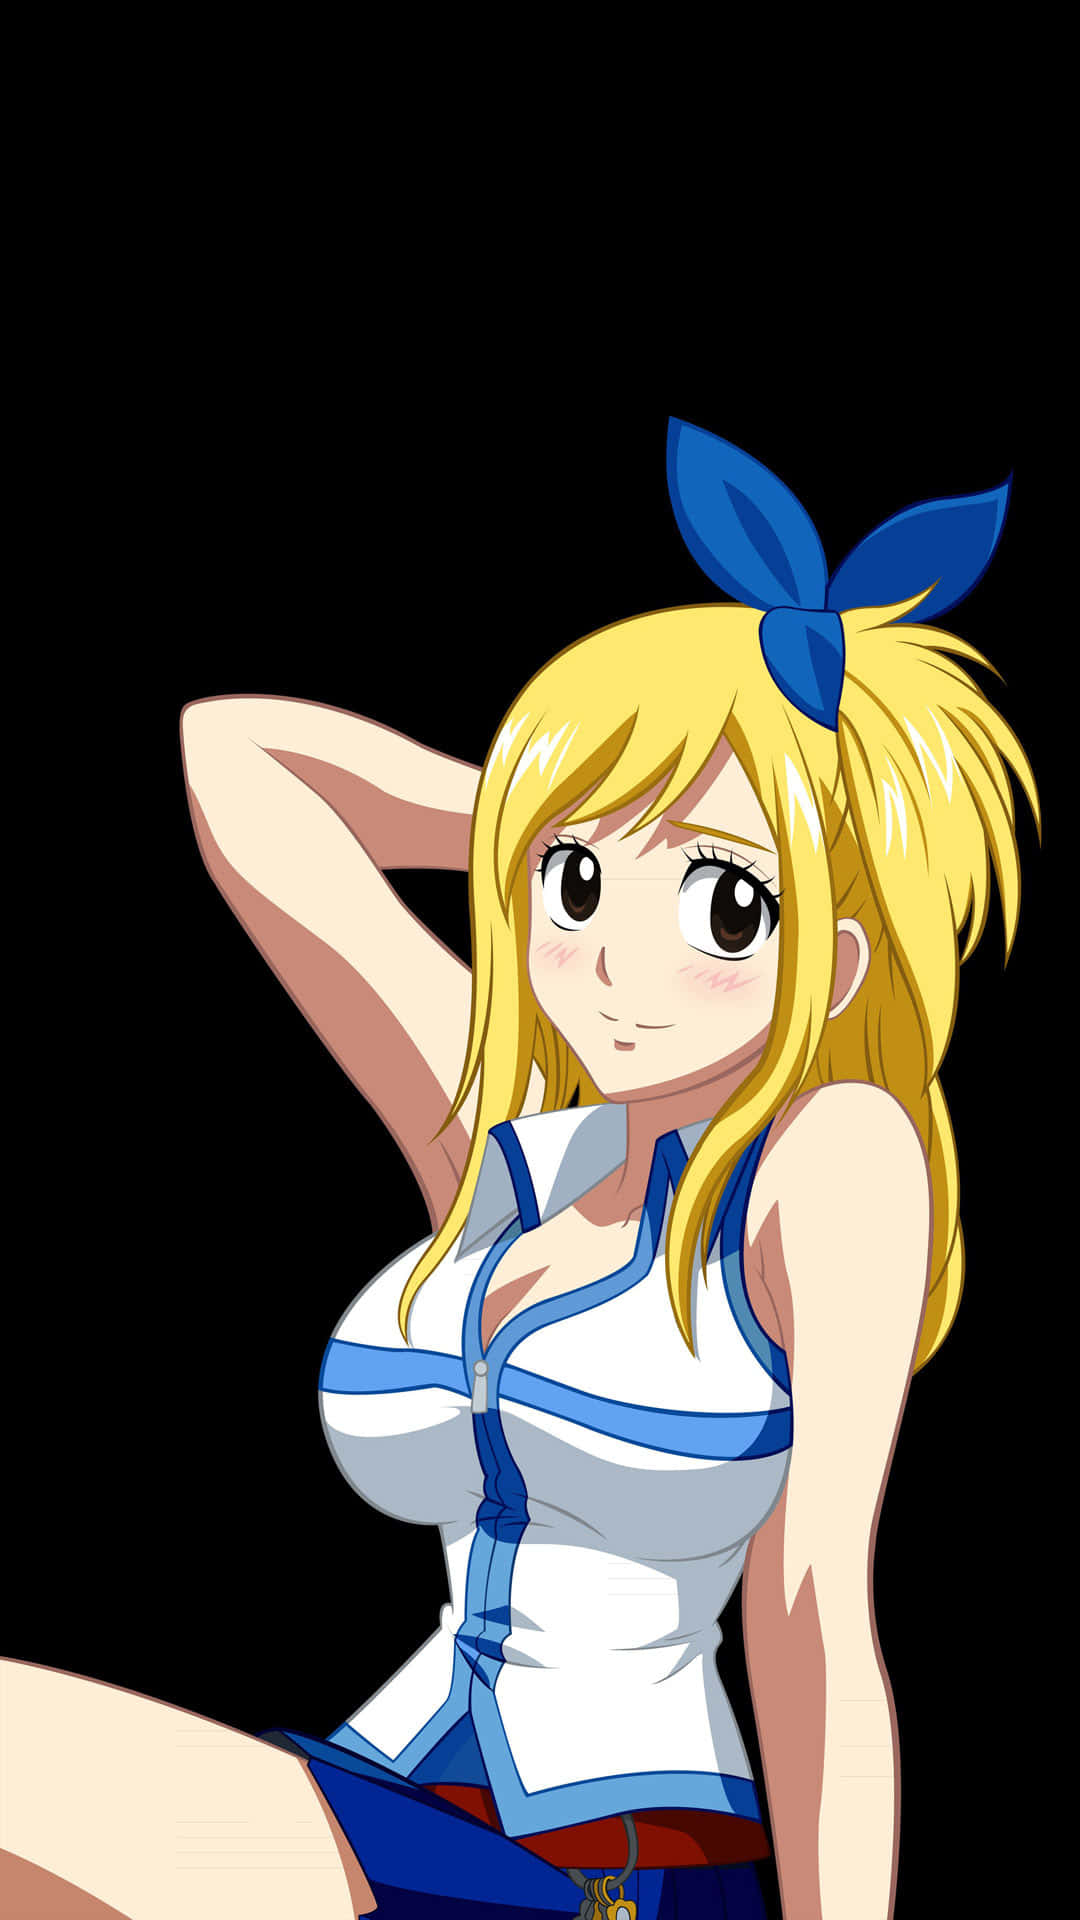 How many keys does Lucy have in Fairy Tail? - Quora